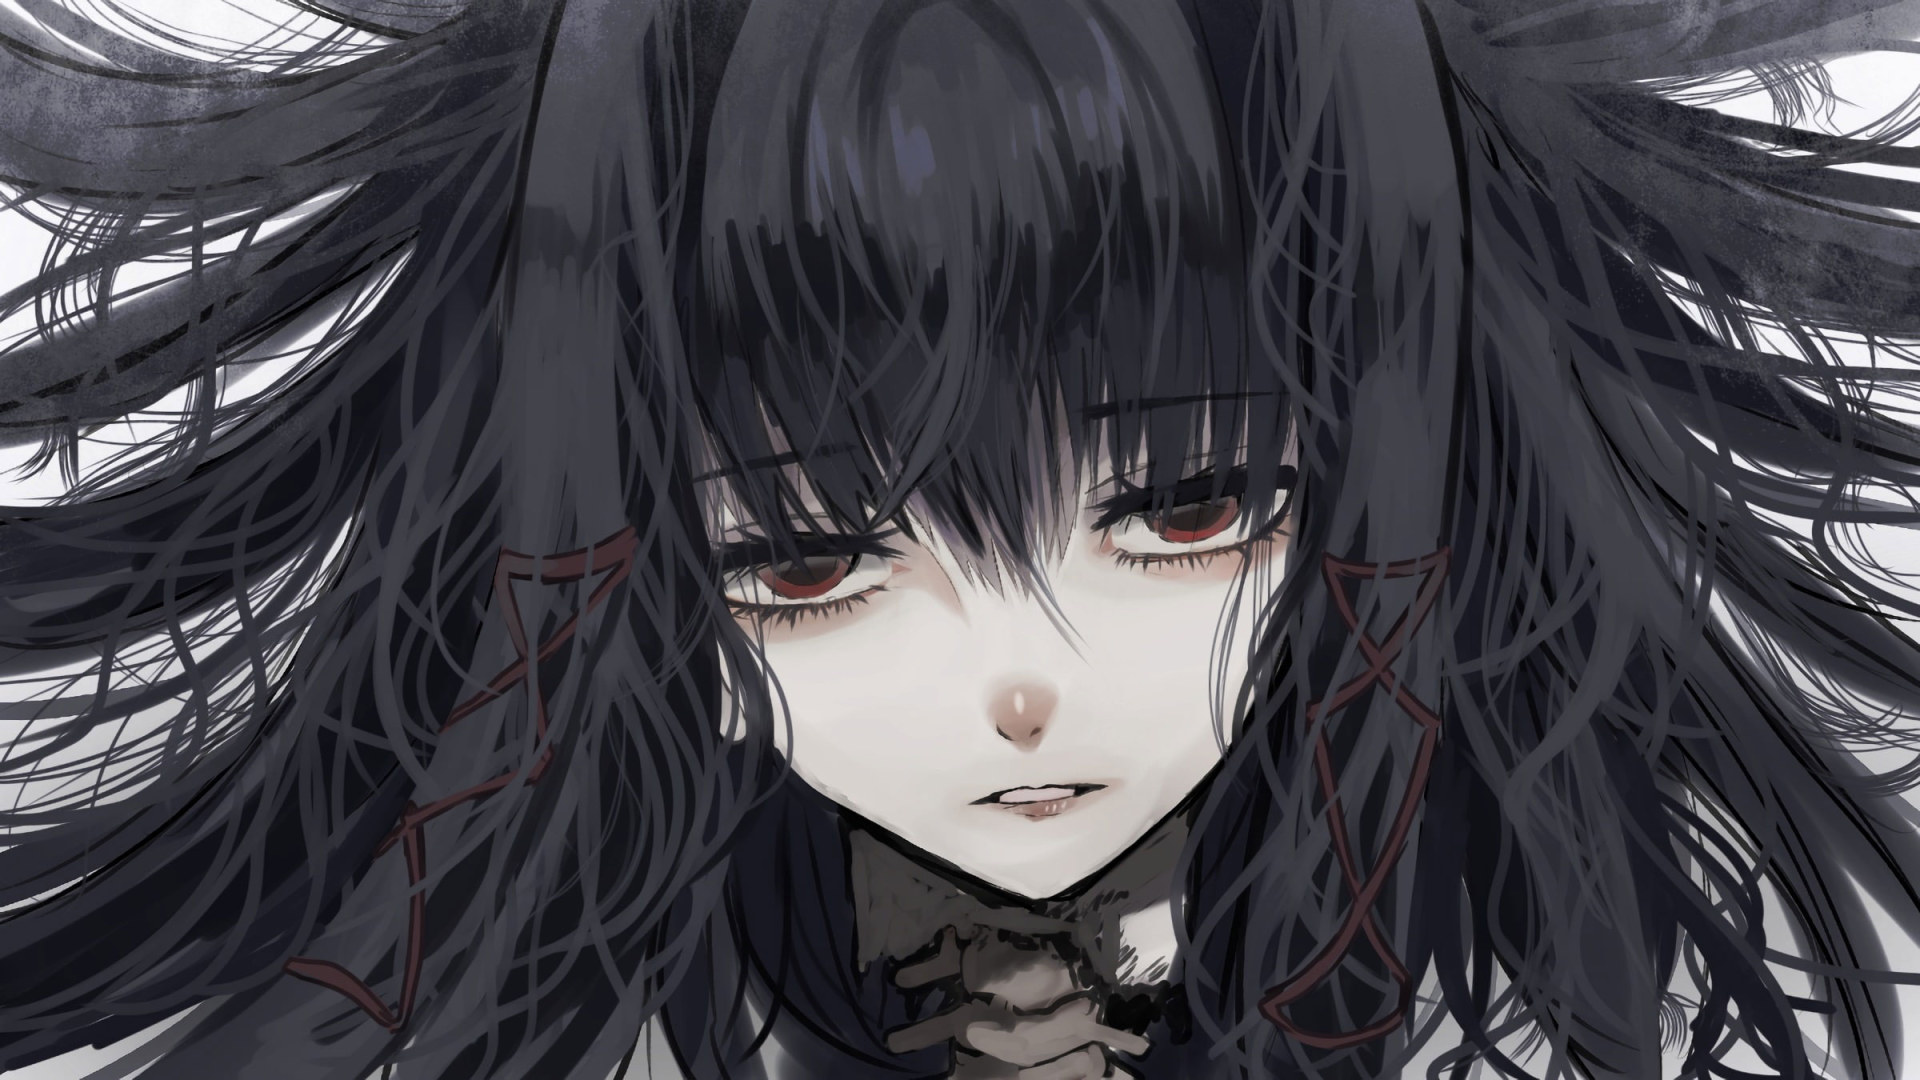 Wallpaper Anime Girl, Gothic, Close Up, Depressed, Black • Wallpaper For You HD Wallpaper For Desktop & Mobile